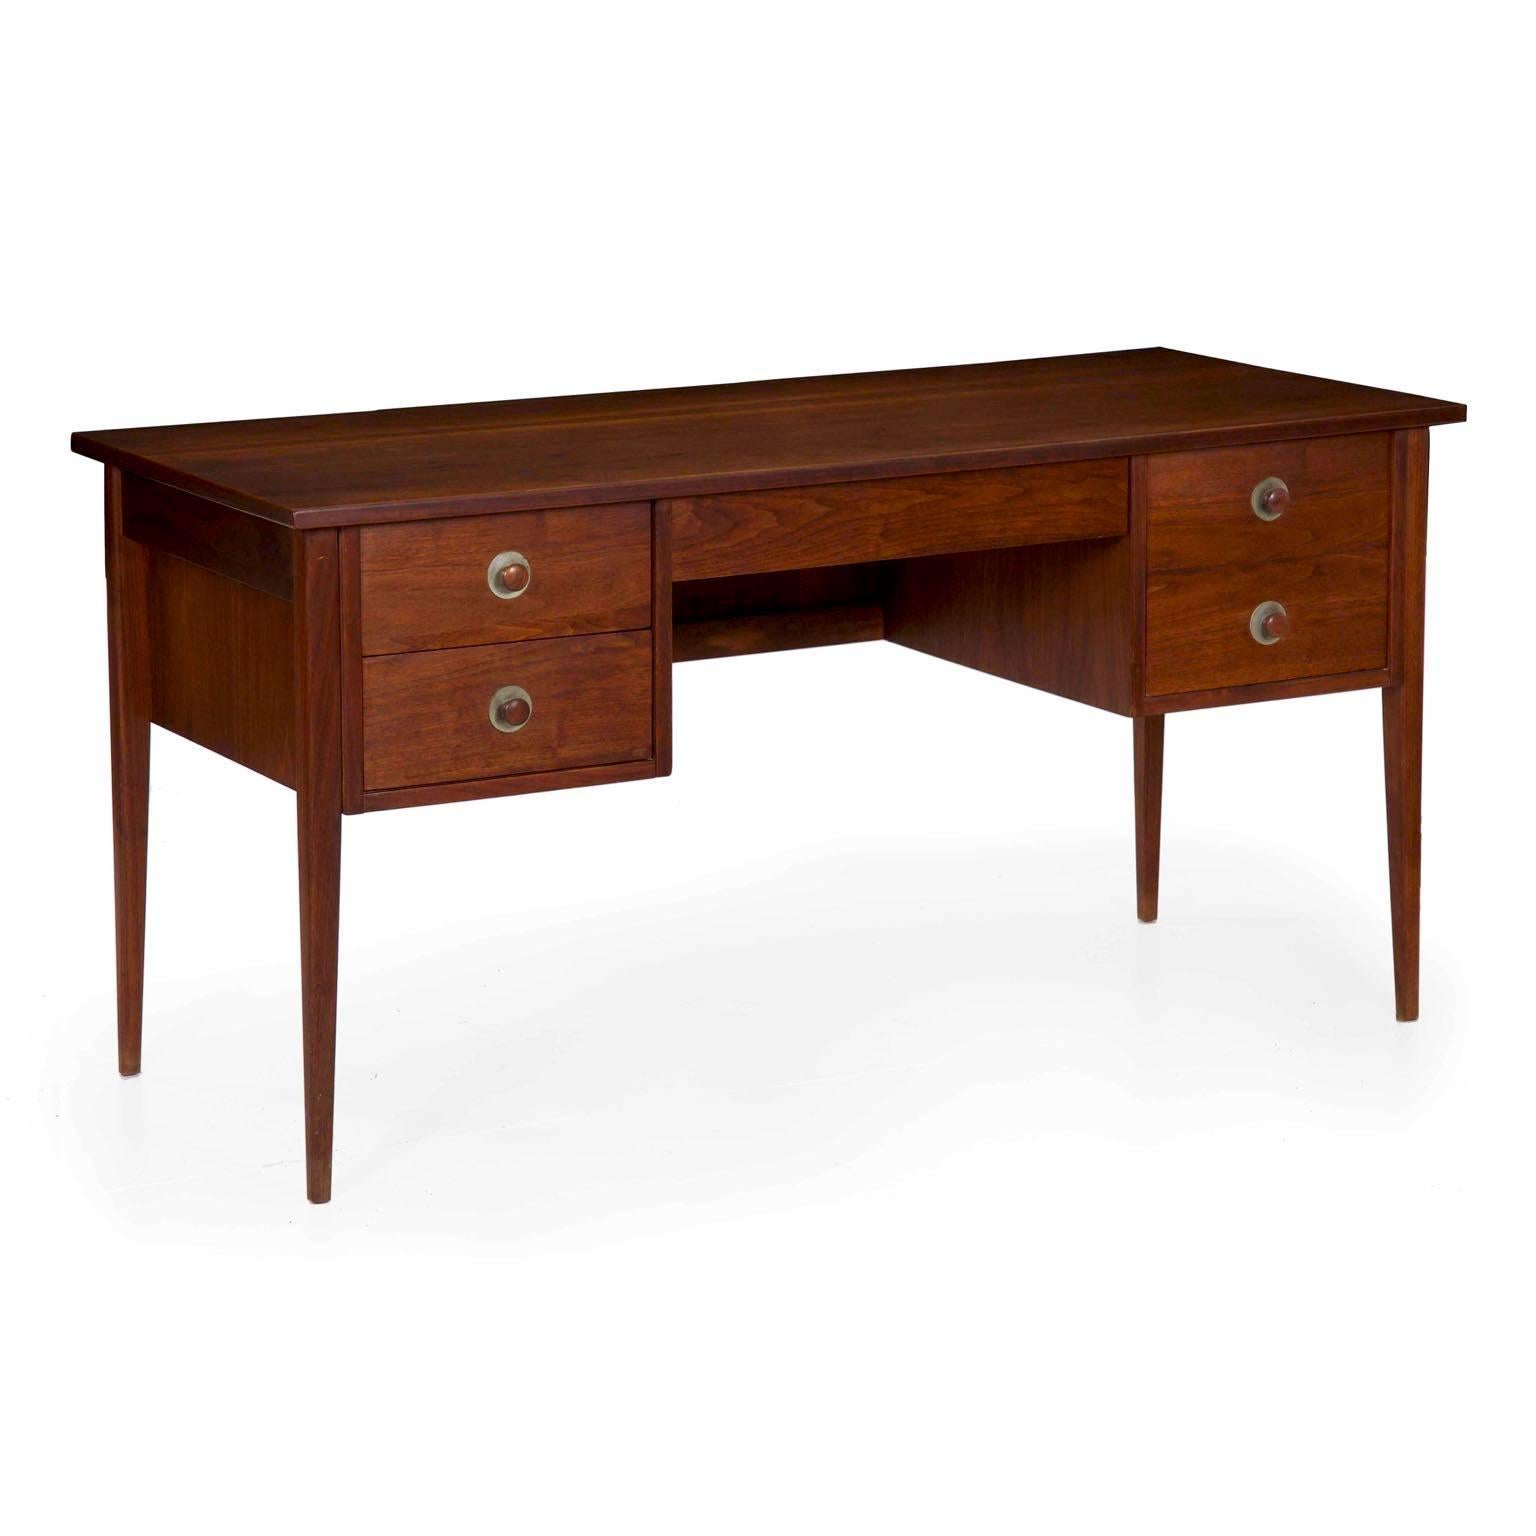 This is an attractive 1960s vintage writing desk crafted of walnut and walnut veneers over oak secondaries in the machine-dovetailed drawers. It is sleek and angular with nice turned handles backed by steel accents, the pair of stacked drawers on